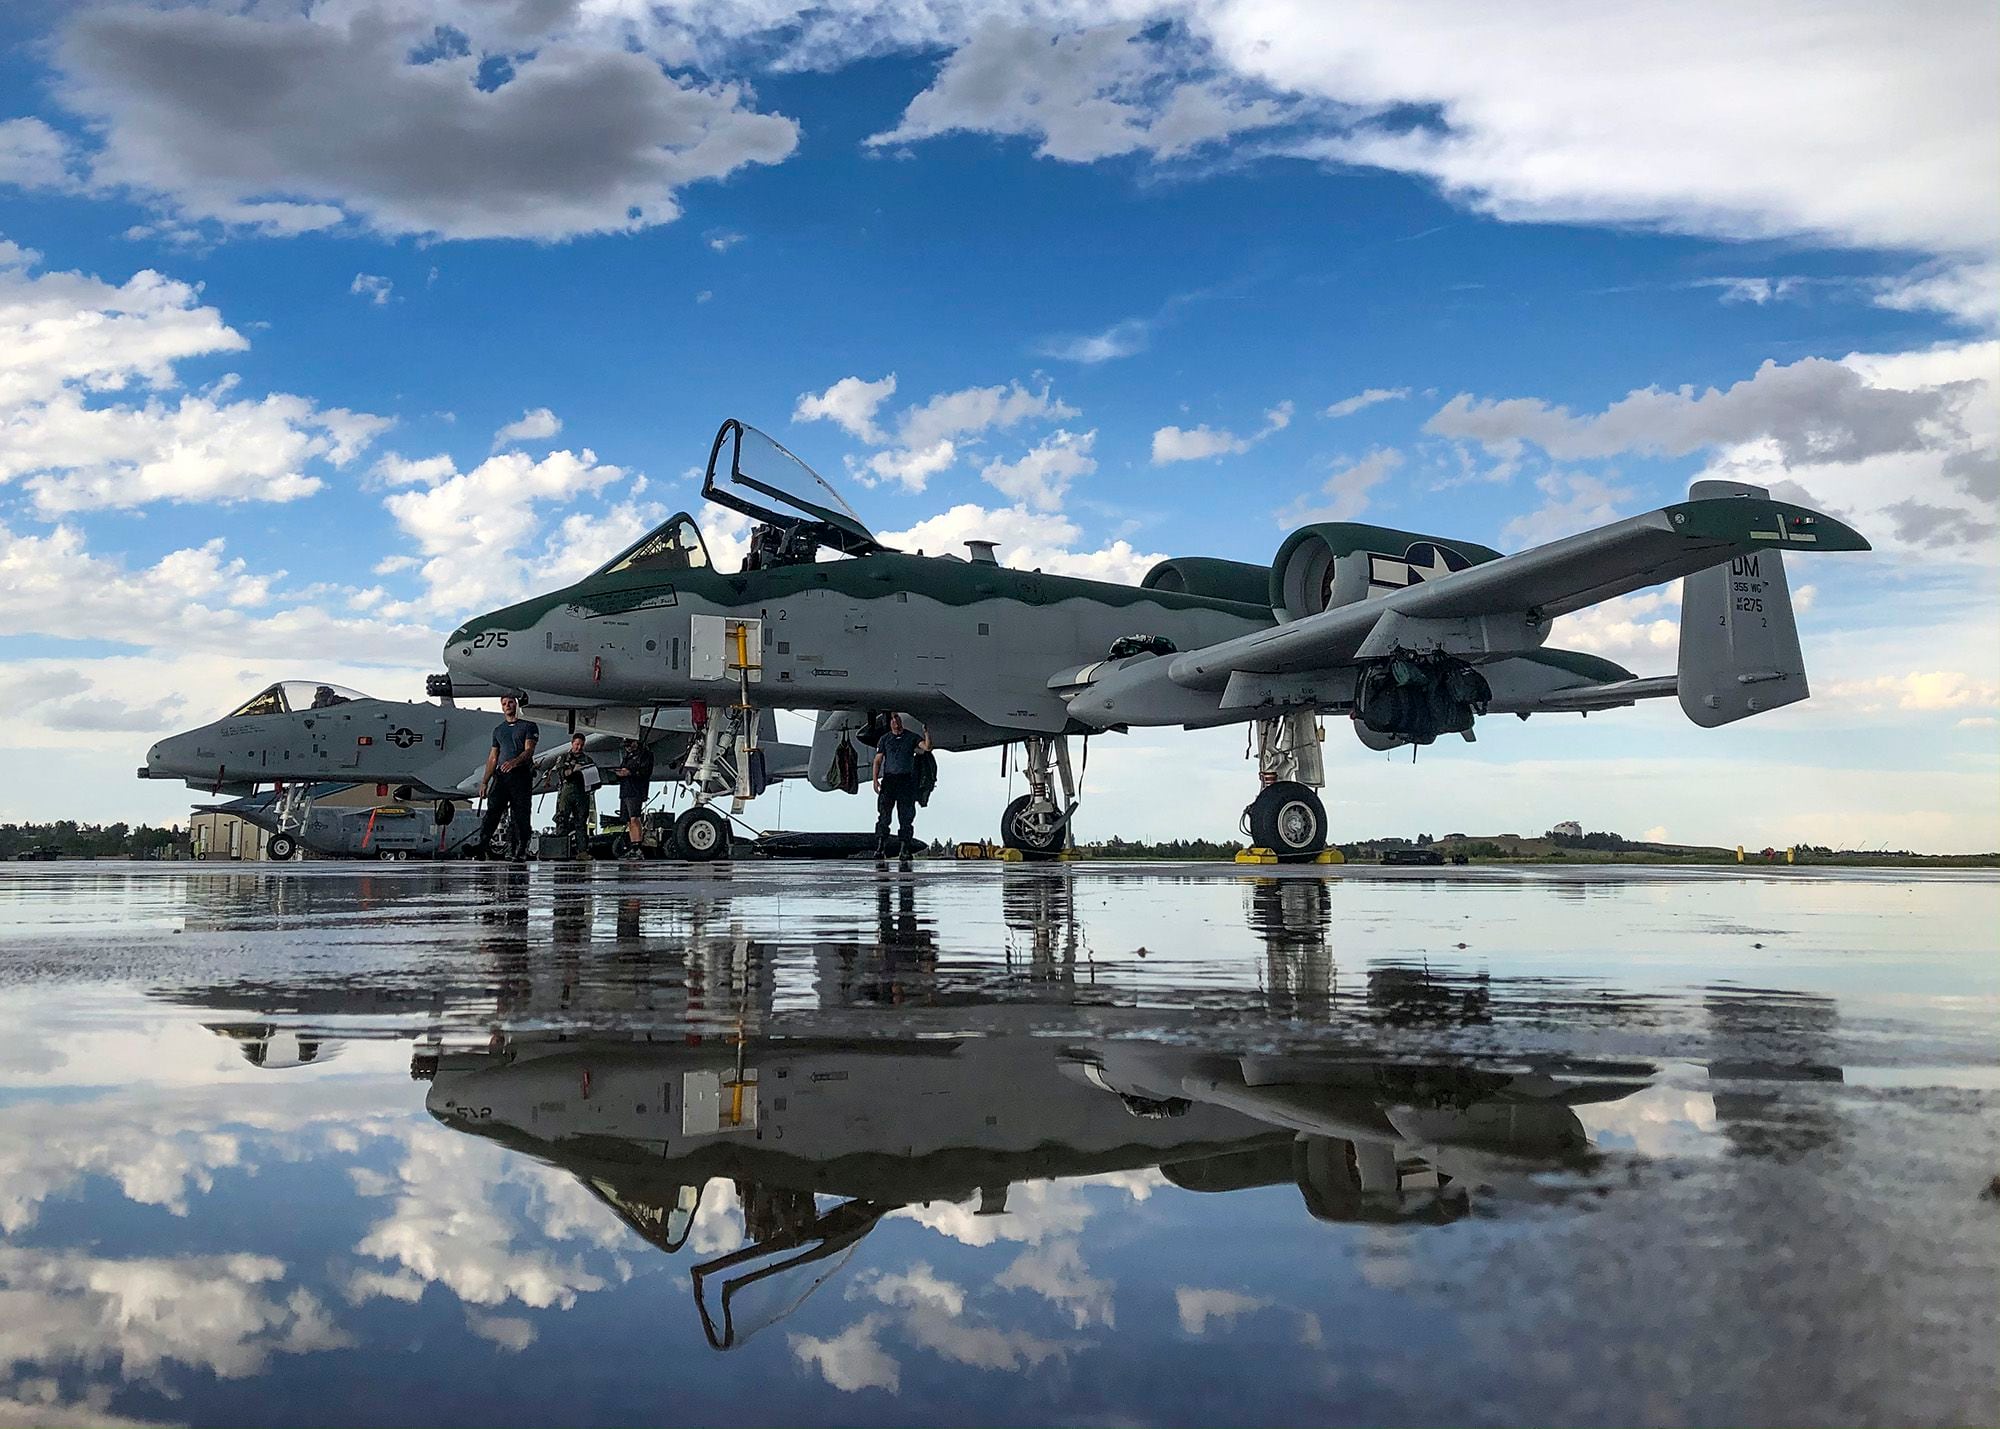 Us Air Force To Mothball Dozens Of A-10S, F-15S And F-16S In Fy22 Budget